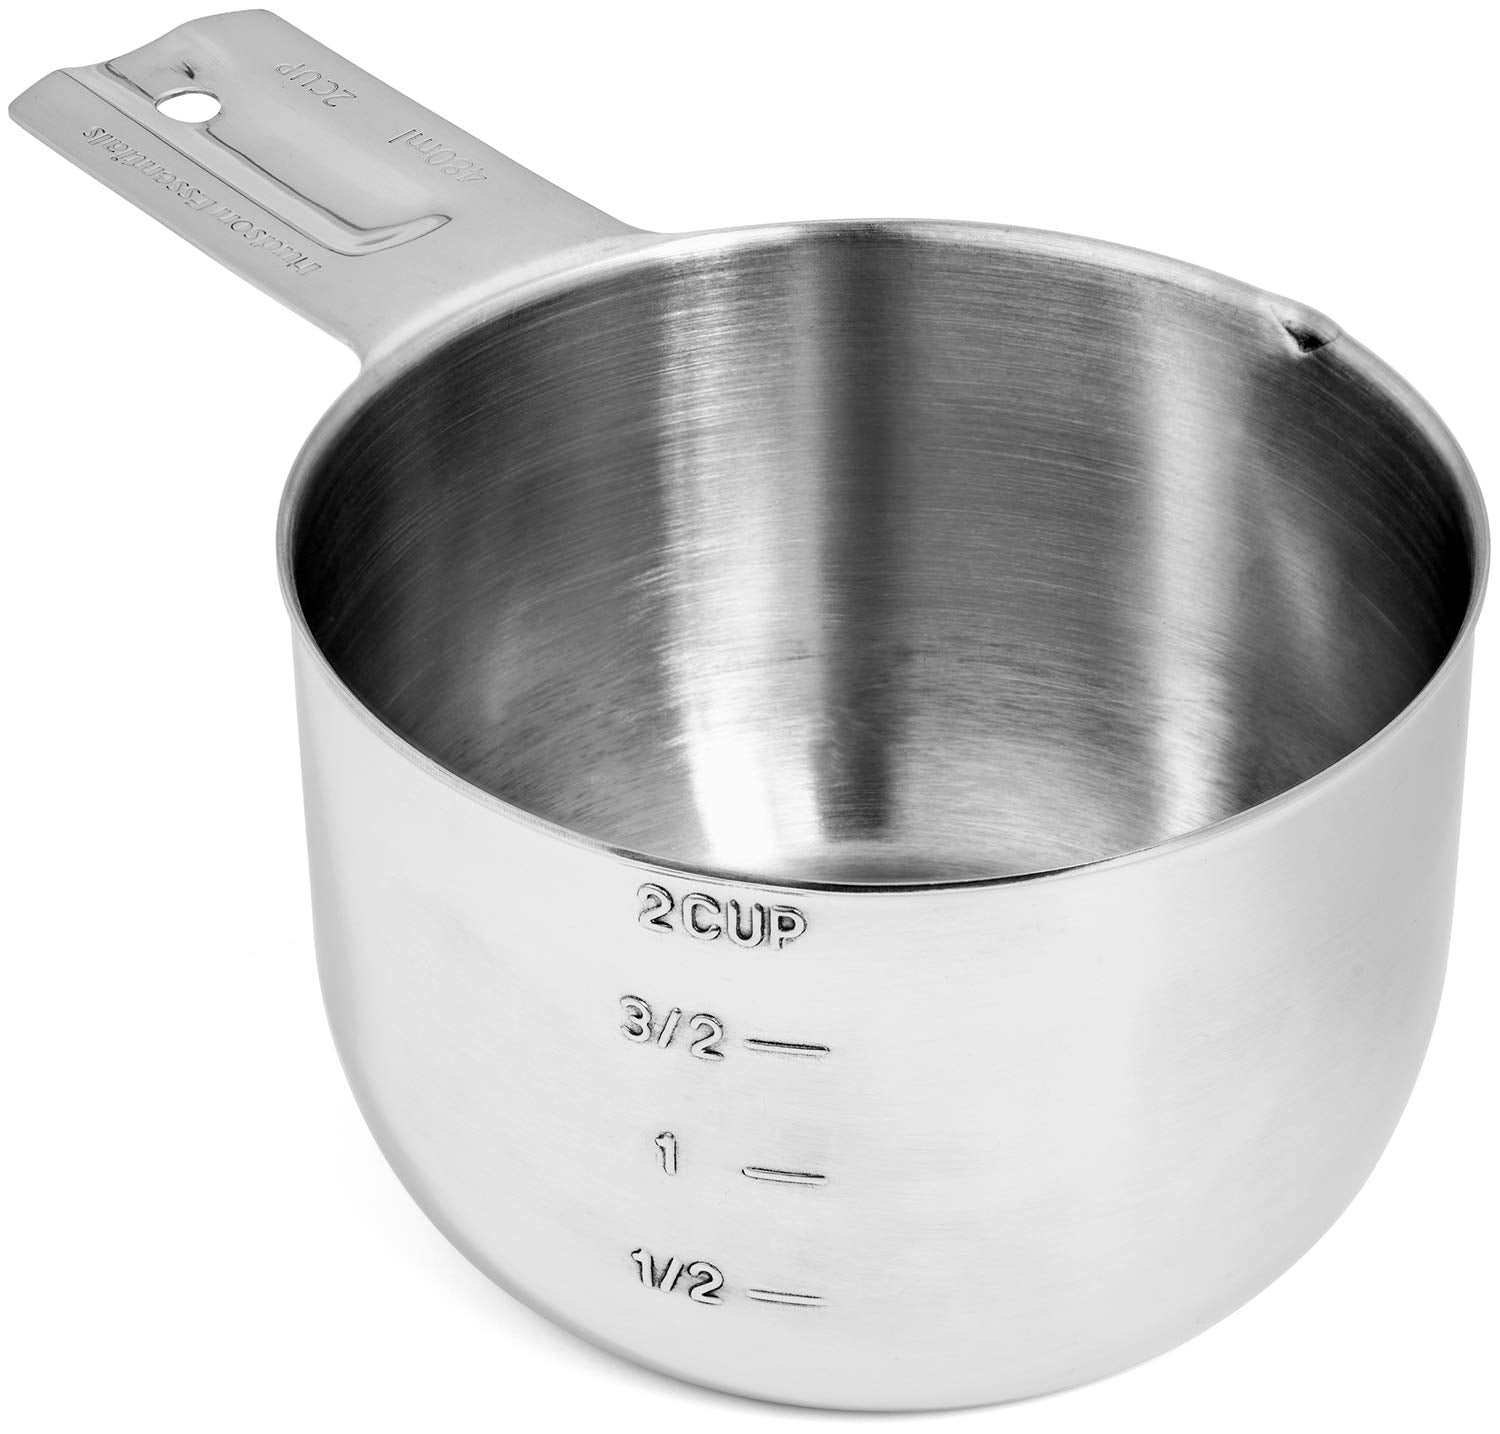 Stainless Steel Dry Measuring Cup Set, 4 Piece - SANE - Sewing and  Housewares